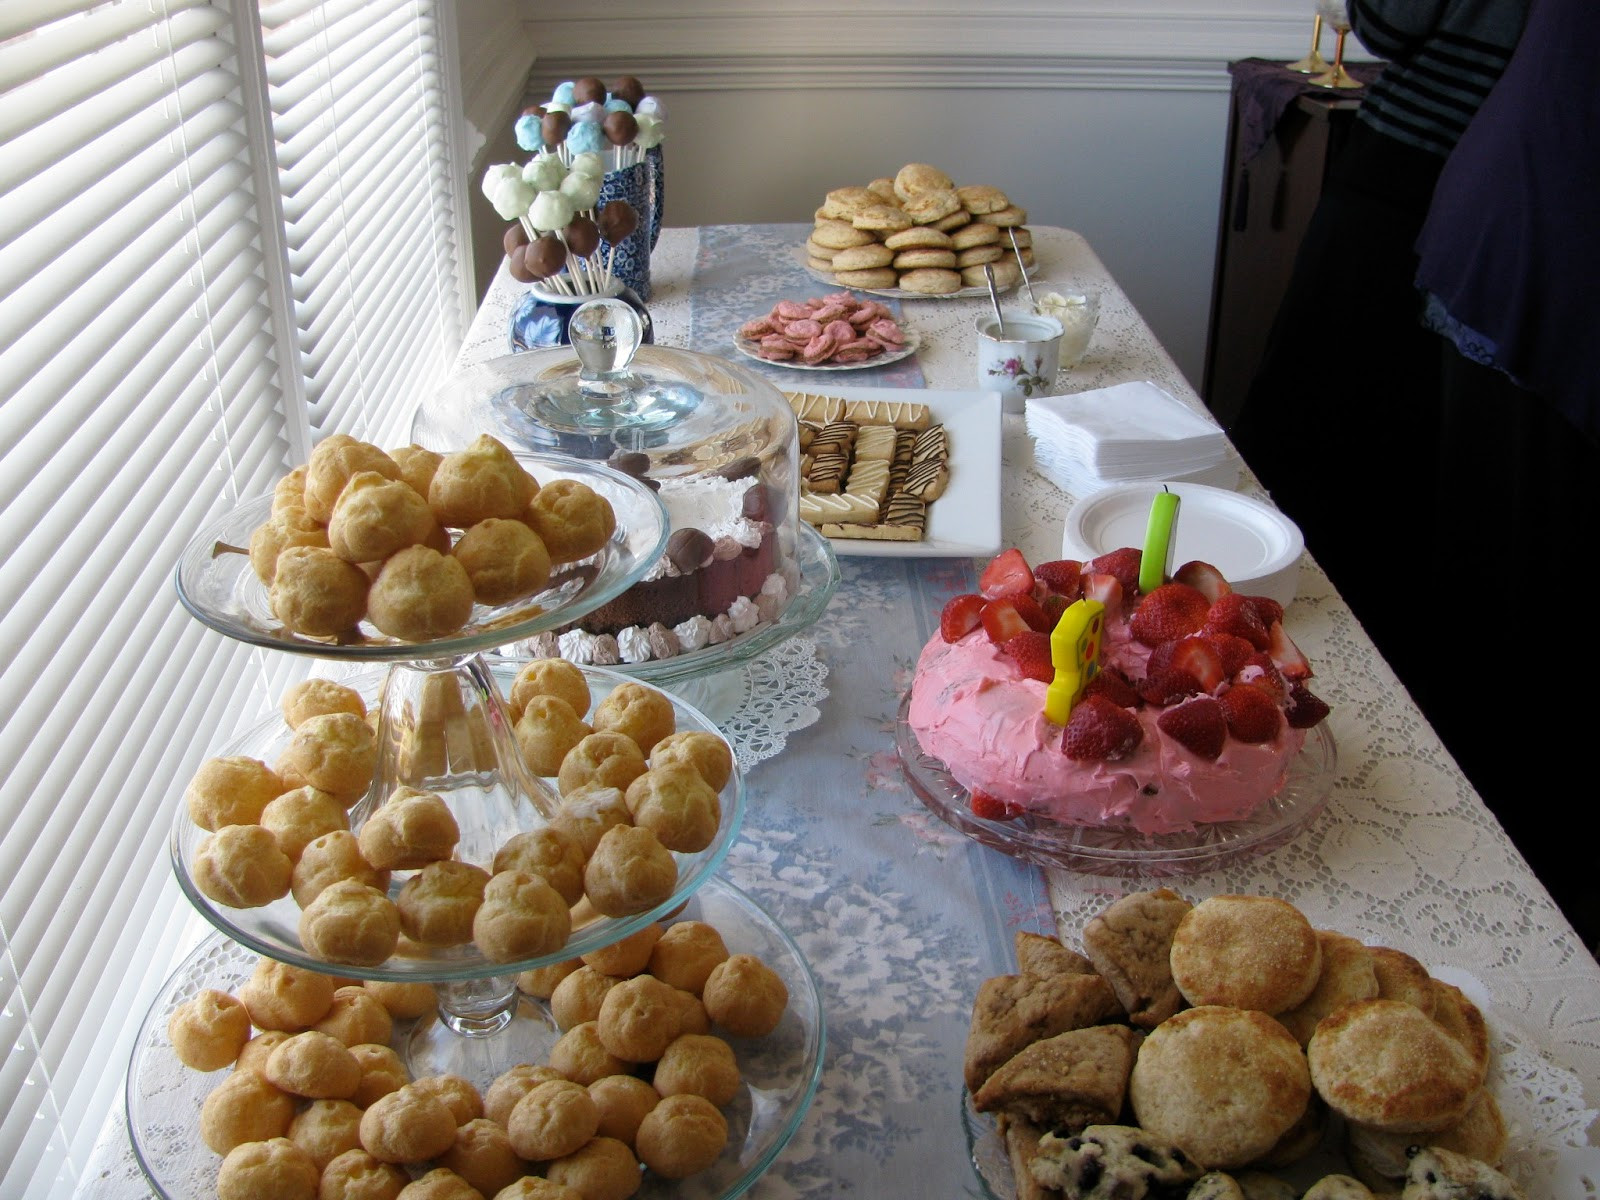 Kitchen Tea Party Food Ideas
 A Kettle in the Kitchen Emily s Sweet Sixteen Tea Party Food